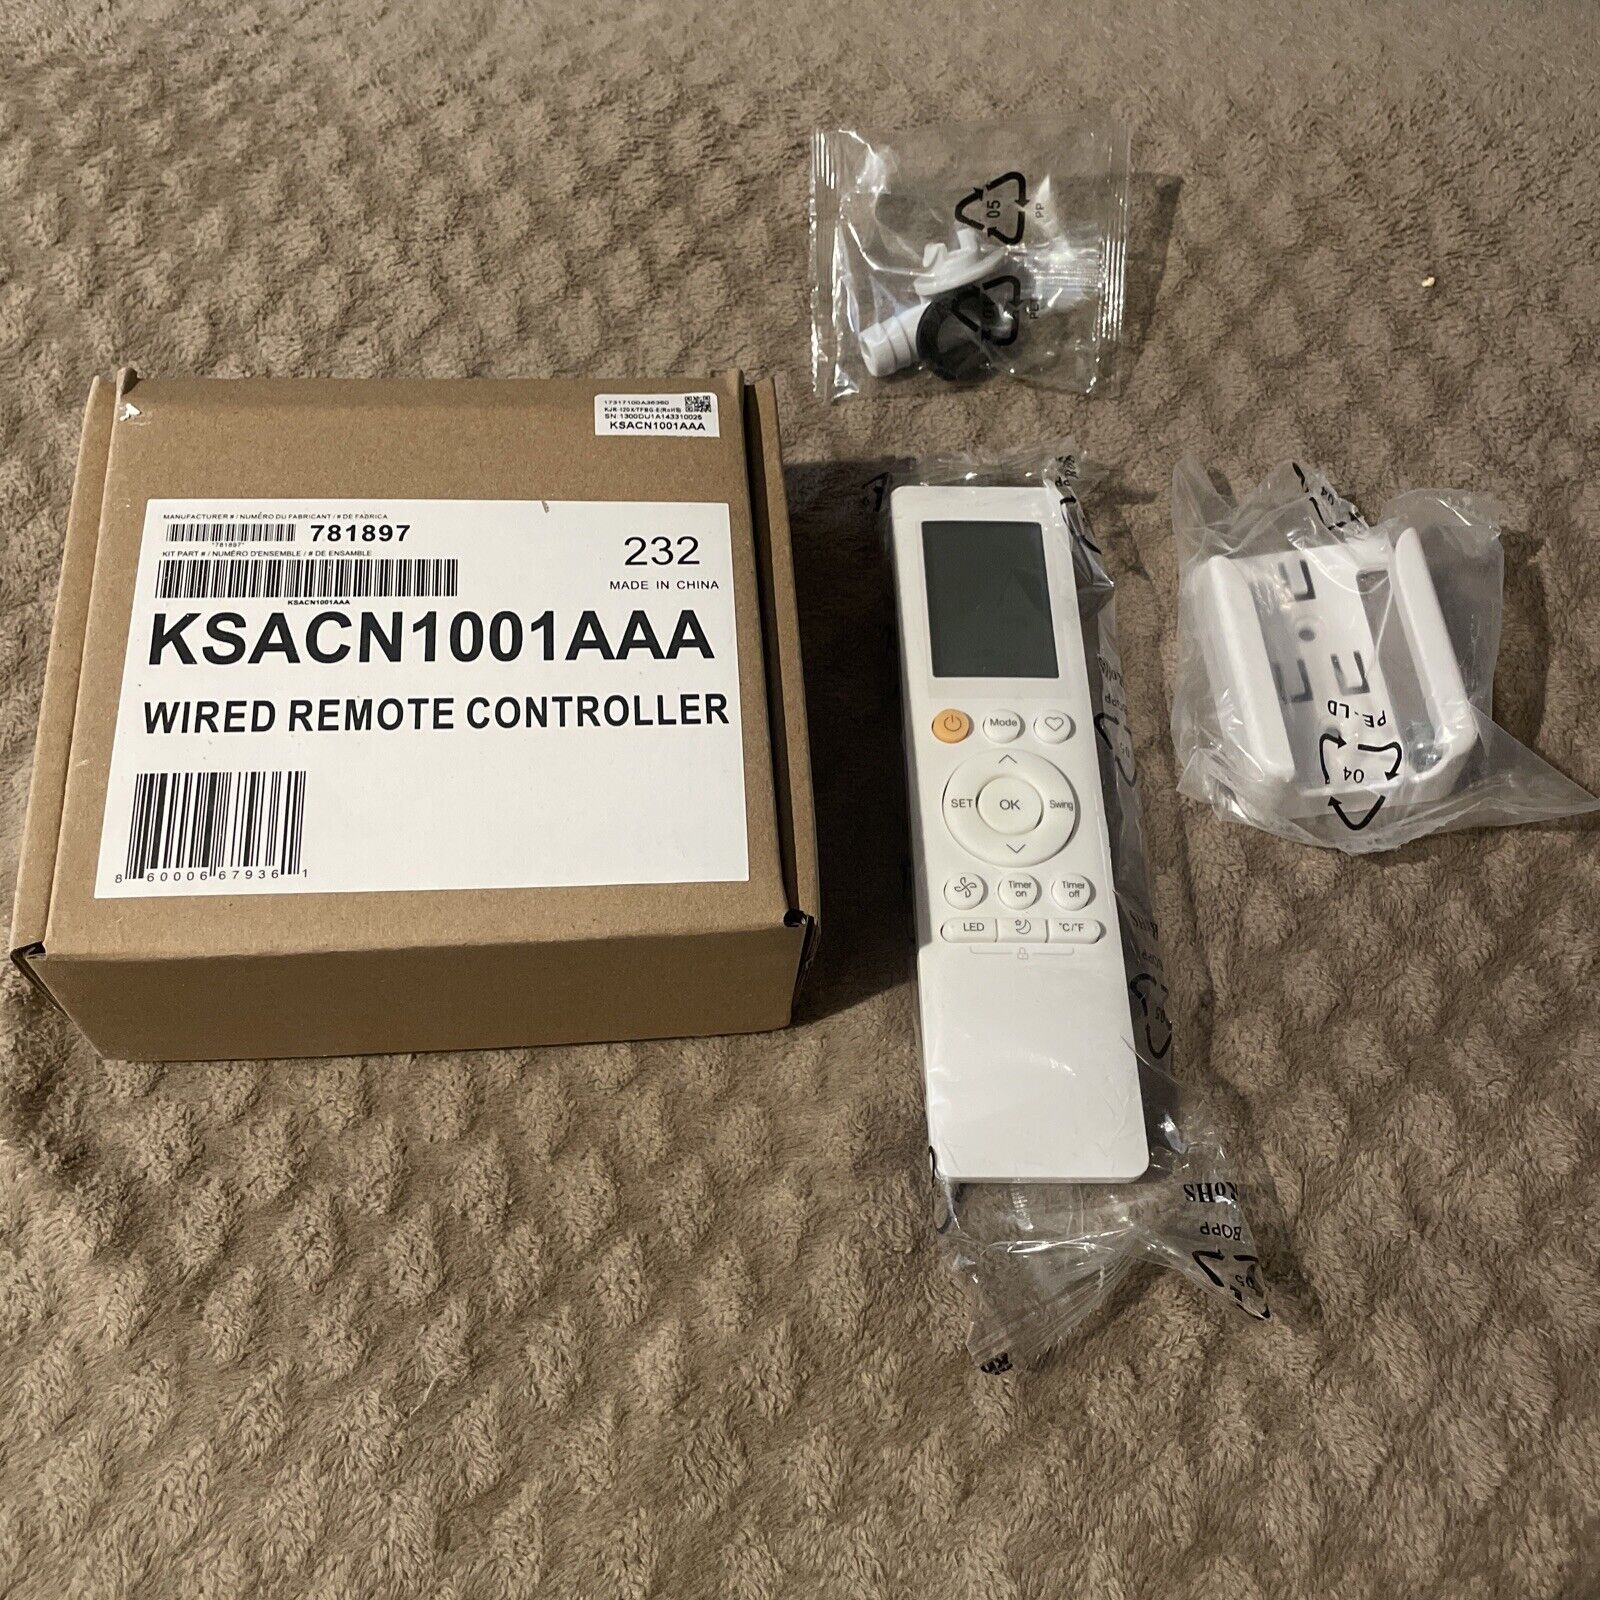 Carrier KSACN1001AAA Wired Remote Controller for Ductless Systems